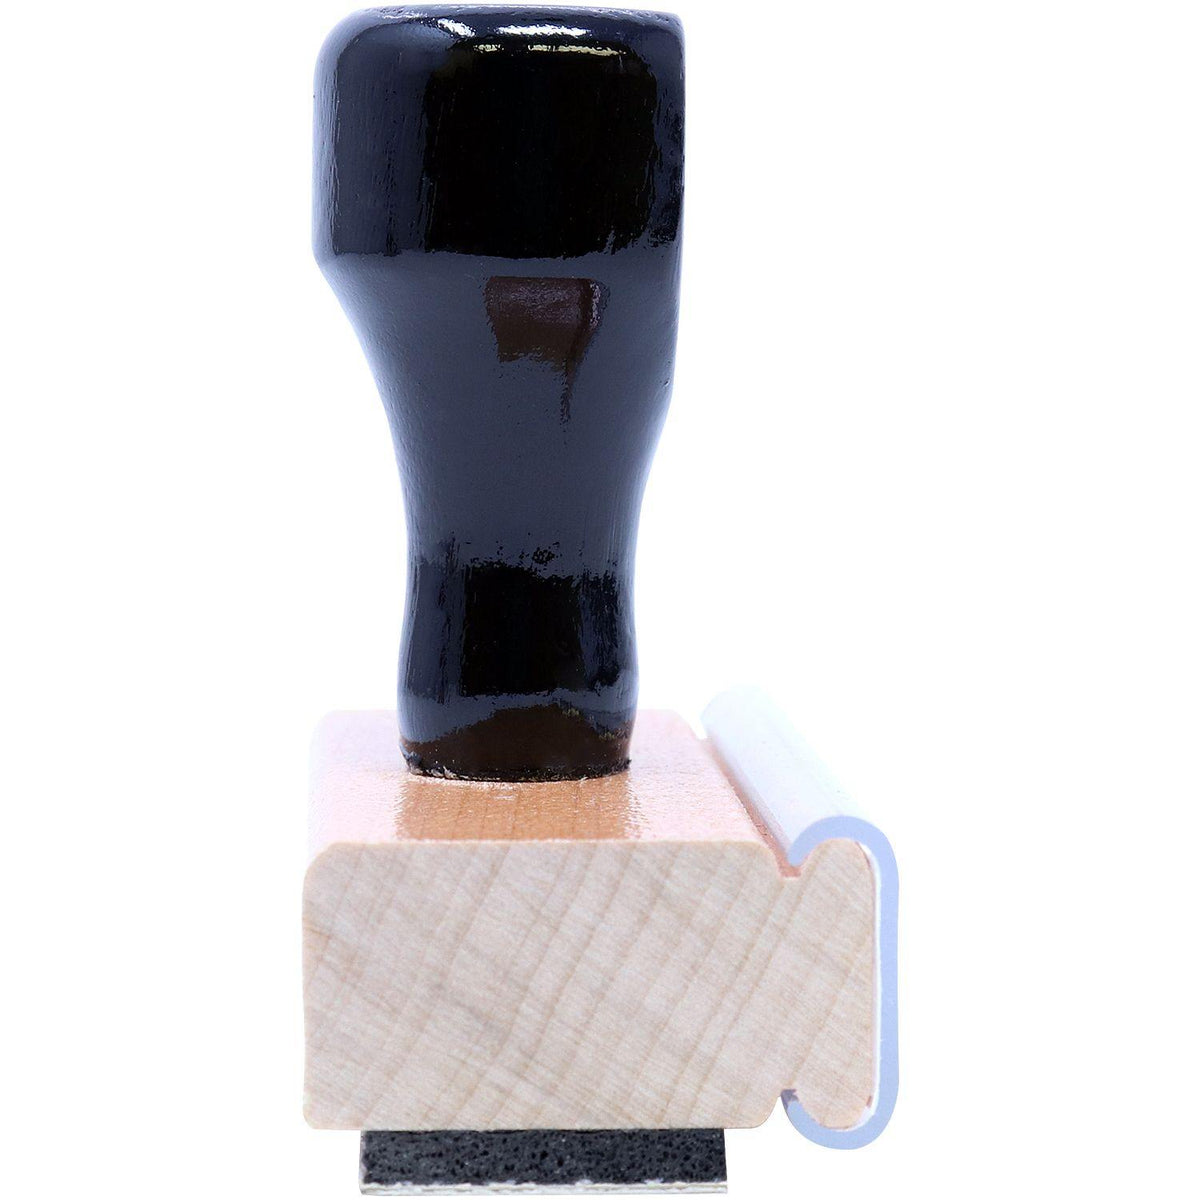 PAL Rubber Stamp - Engineer Seal Stamps - Brand_Acorn, Impression Size_Small, Stamp Type_Regular Stamp, Type of Use_General, Type of Use_Office